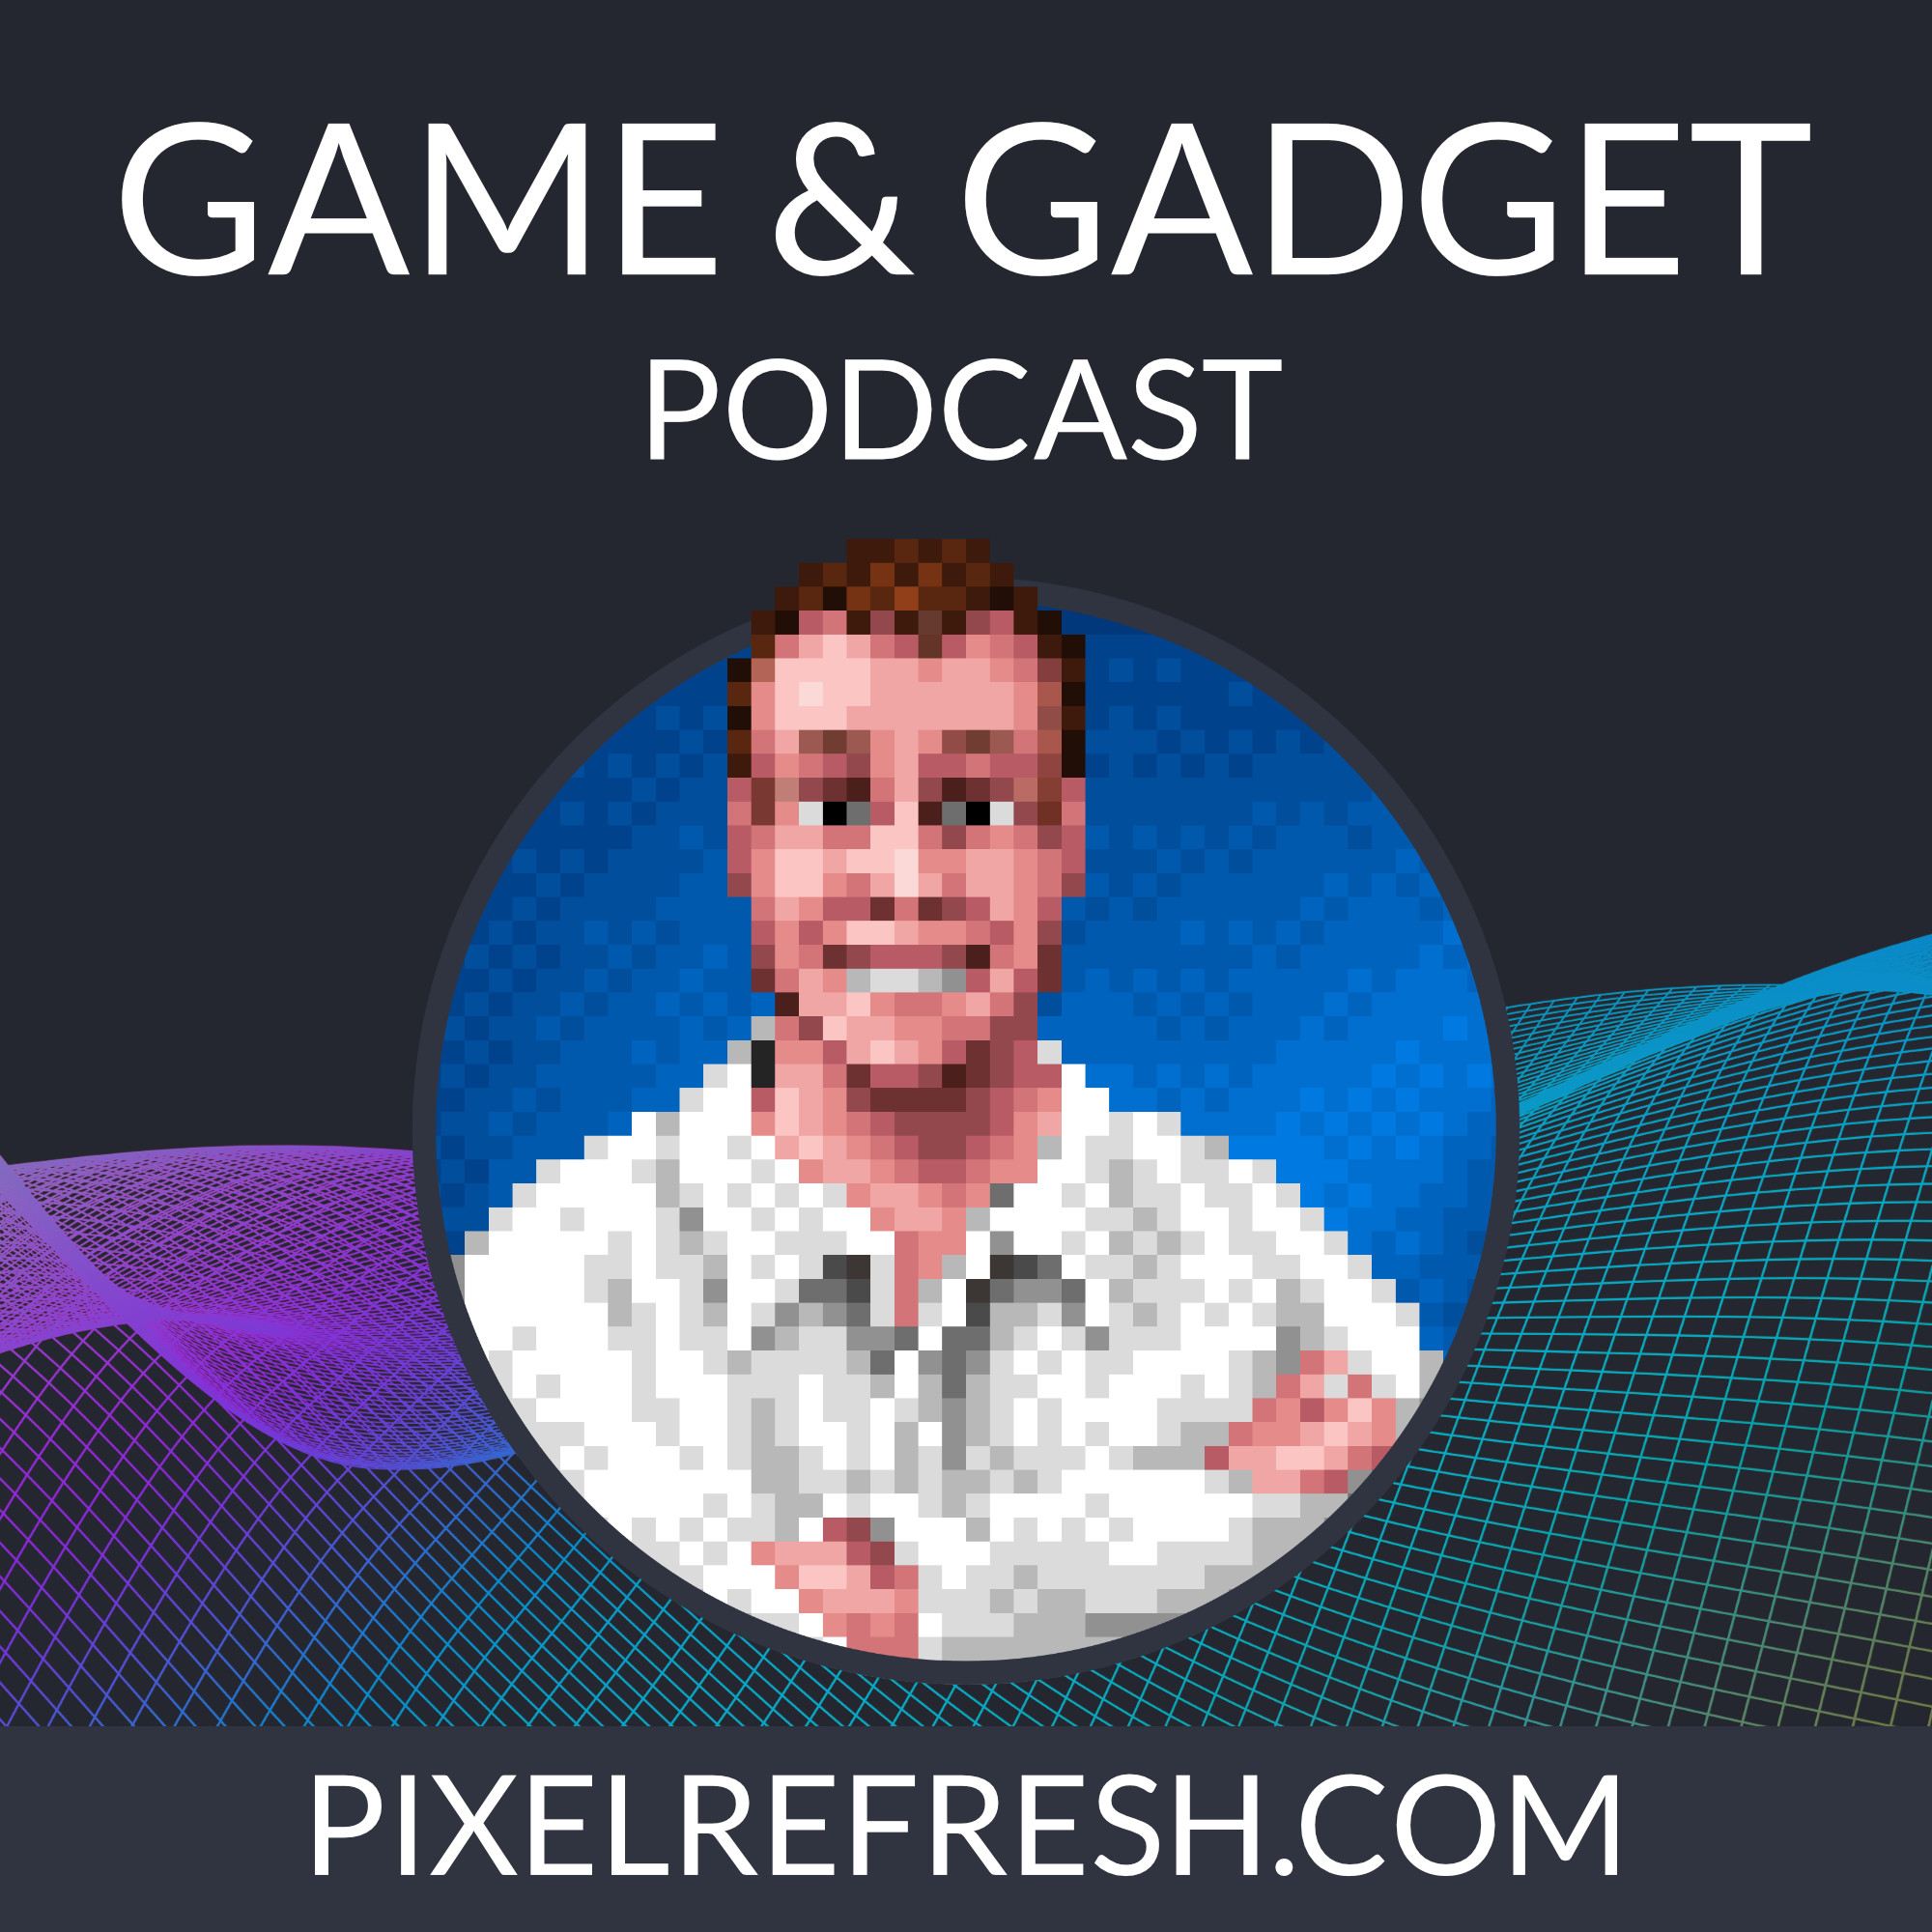 Game & Gadget Podcast - Pixel Refresh